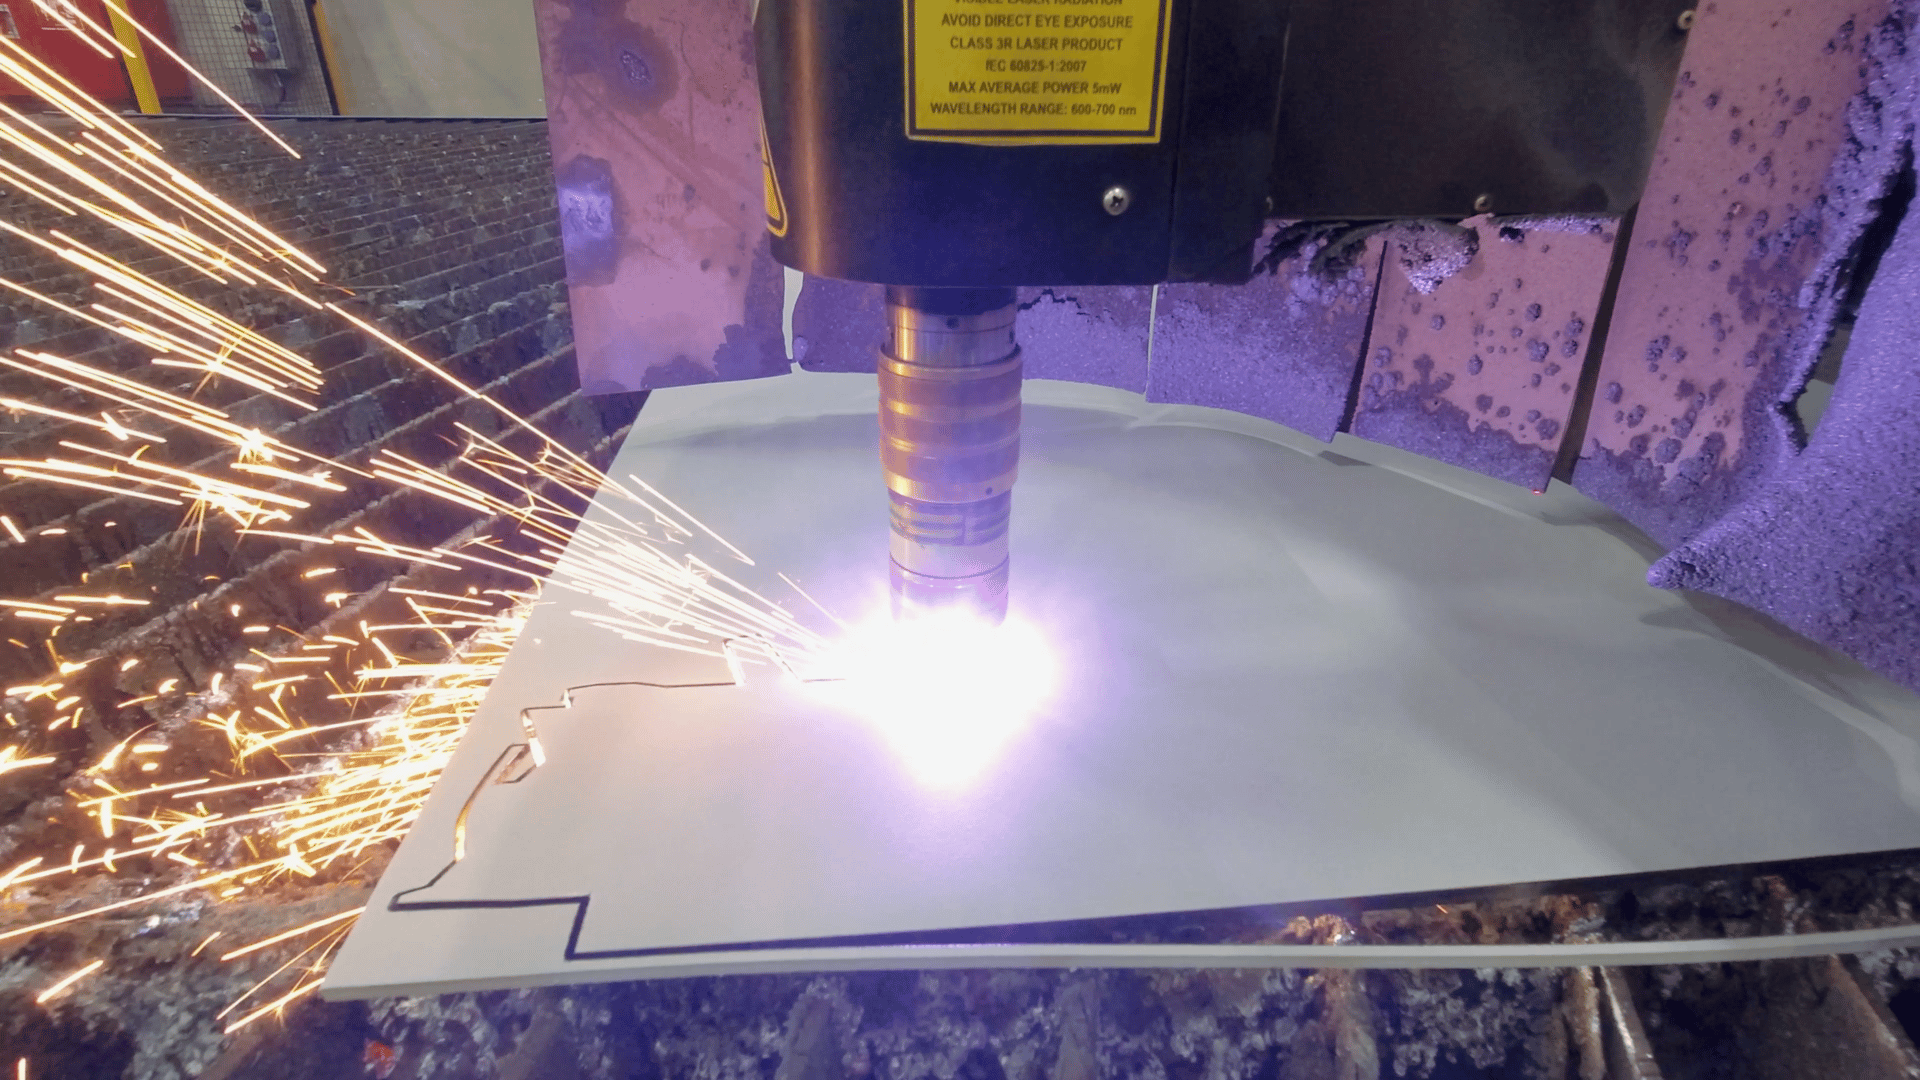 Cutting steel for the new Icon class cruise ship